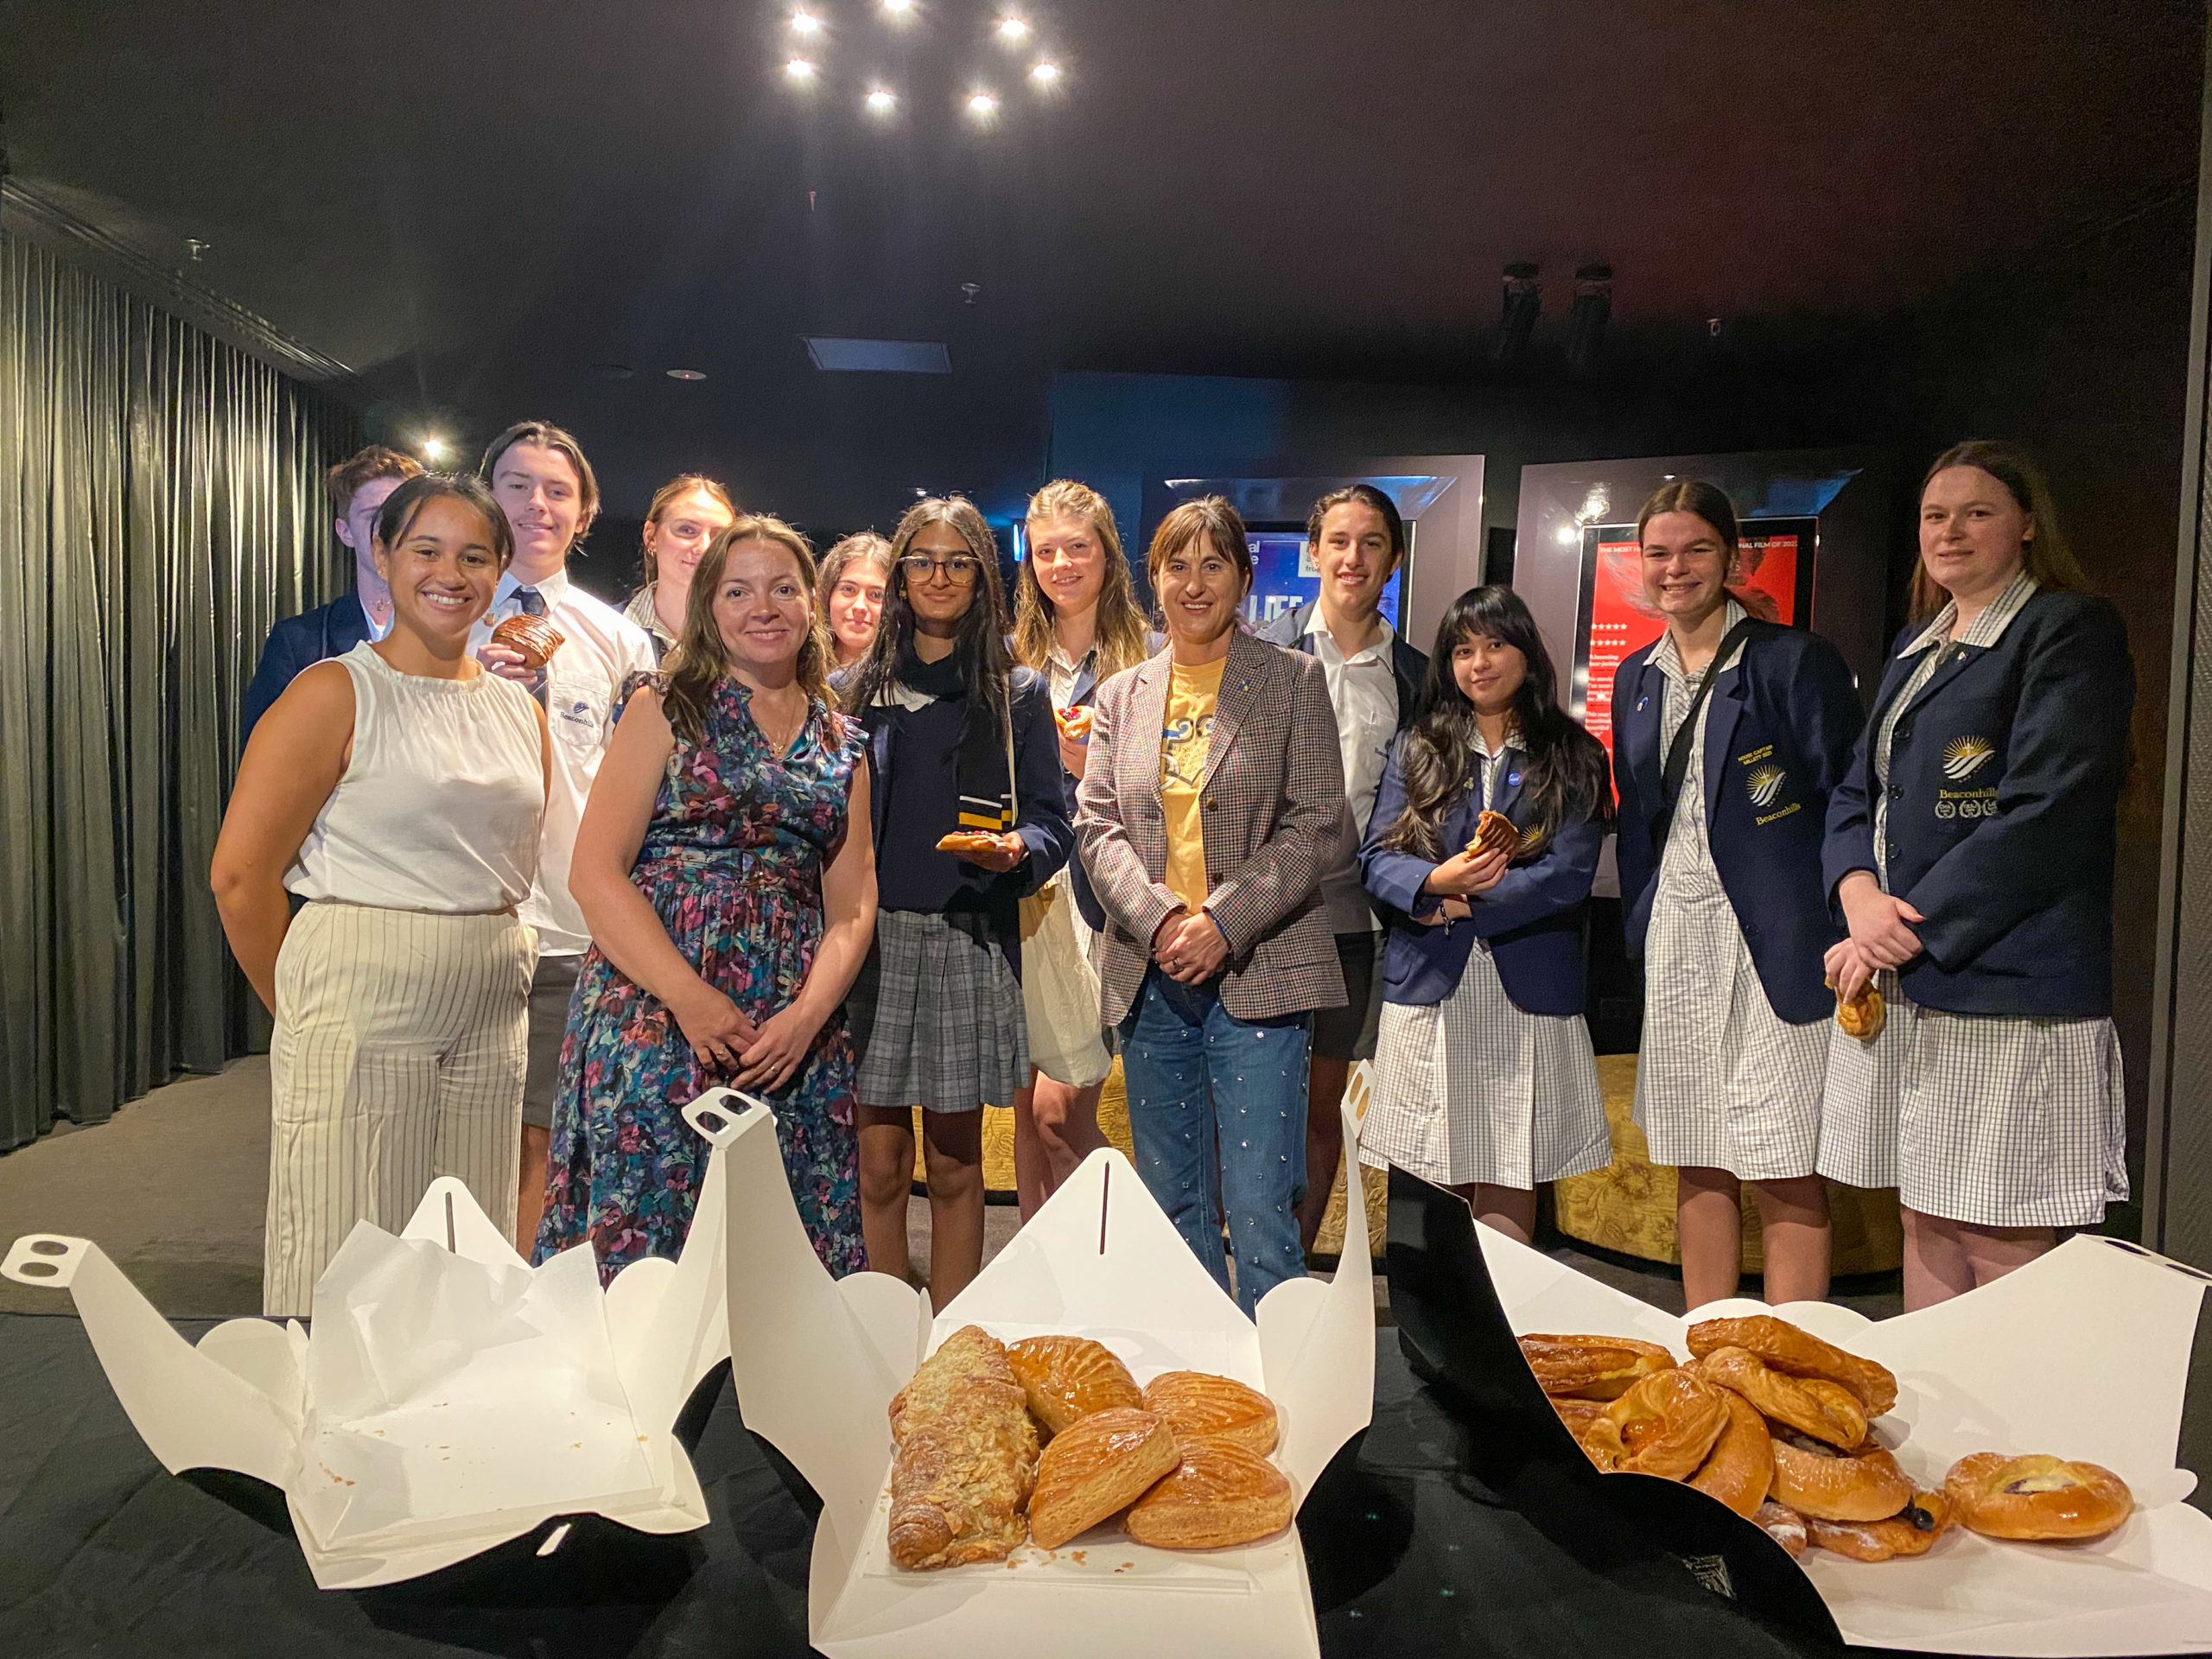 Beaconhills College students posing for a group photo in front of French pastries,